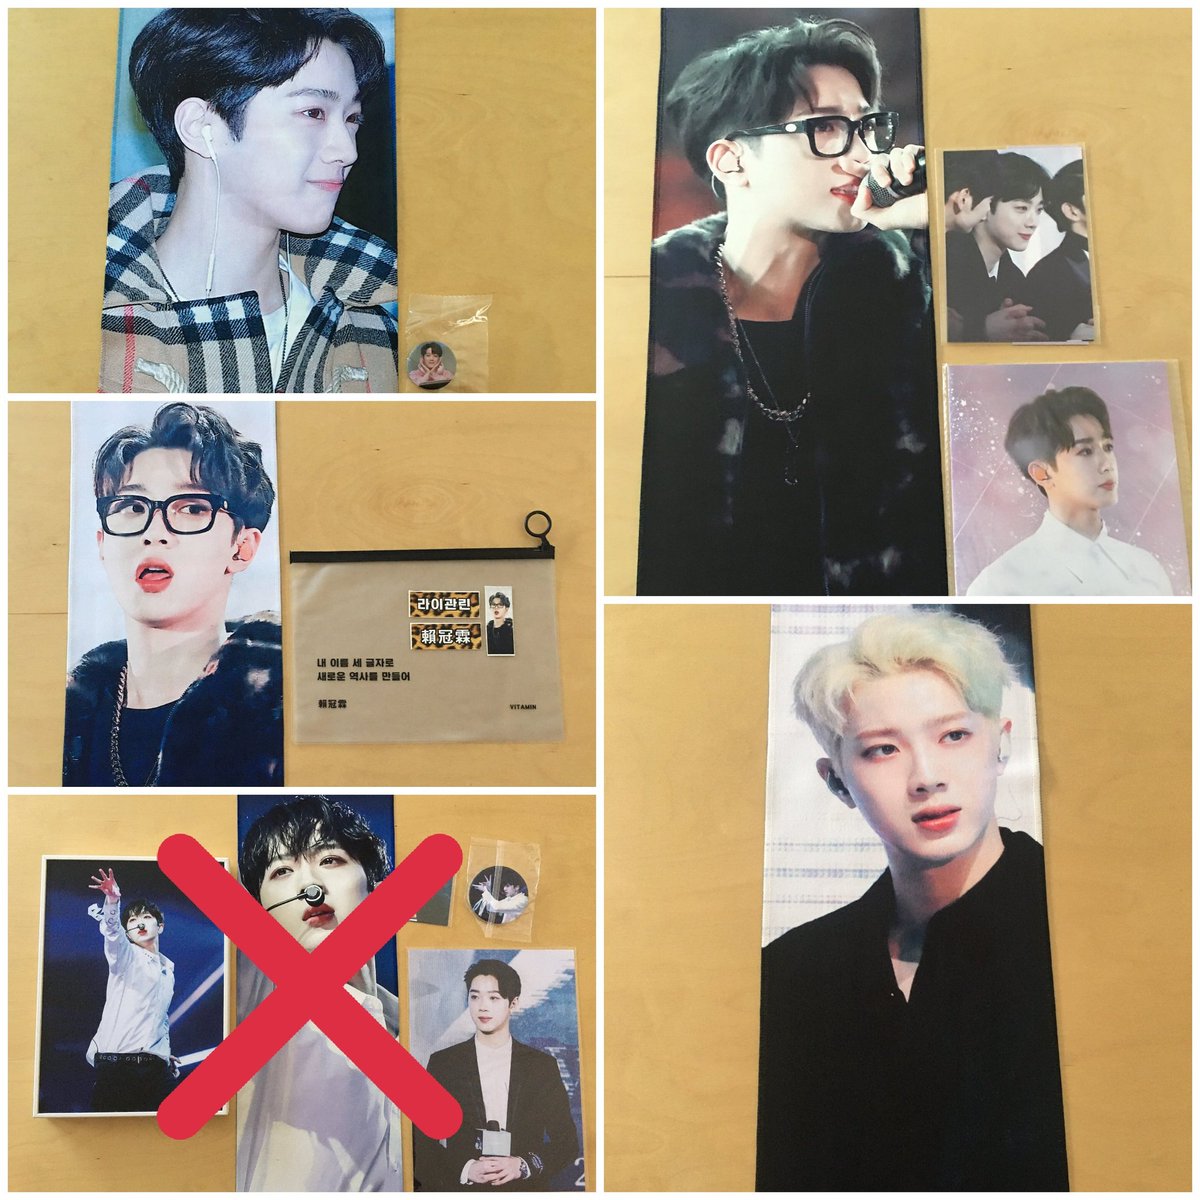 Anneyeong Porkies!LAI KUANLIN CHEERING SLOGANPHP 900 each (w/zipper bags)1 DAY PAYMENT OF 50% OR FULL. OTHER 50% TIL DOP.DOP AUG 19SHIP TO PH AUG 22ETA 15 DAYS OR DEPENDS ON THE SITN.MOP BPI & GCASH ONLY!DM TO ORDER.Kamsa!  #porKShopGO19  #wannaone